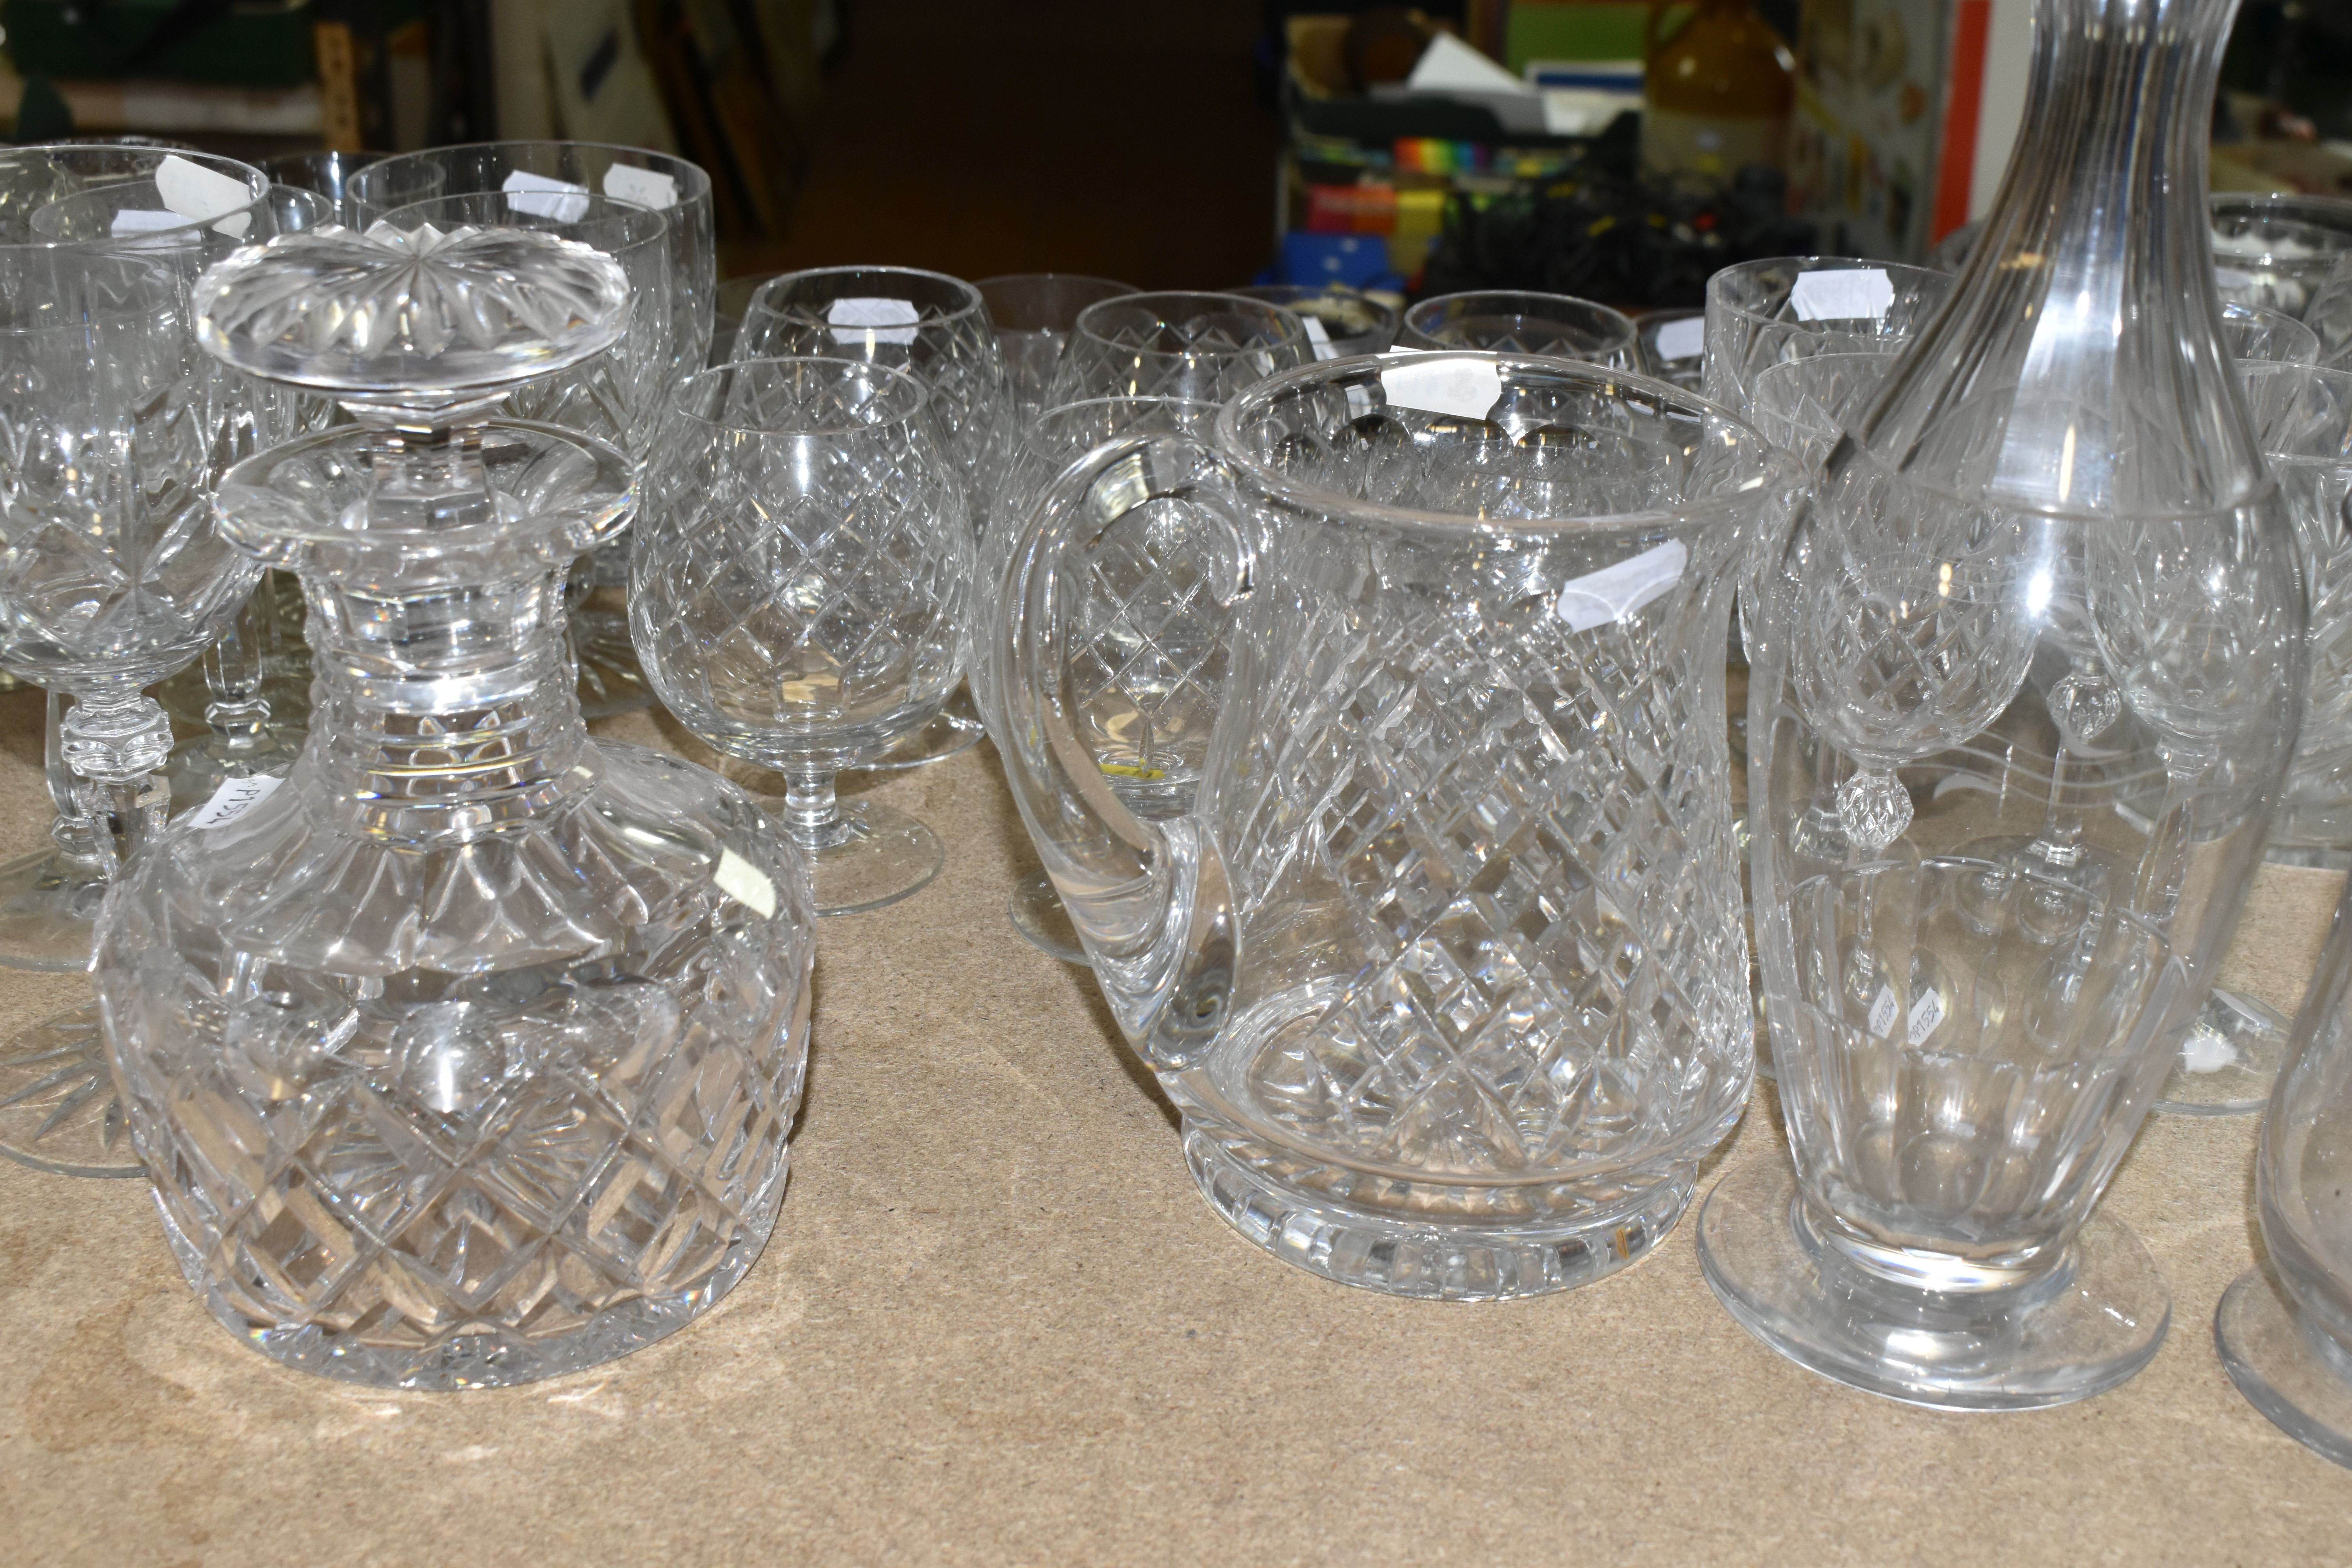 A LARGE VARIETY OF CRYSTAL CUT DECANTERS, GLASSES, ETC, including two 'Royal Brierley' vases and a - Image 7 of 8